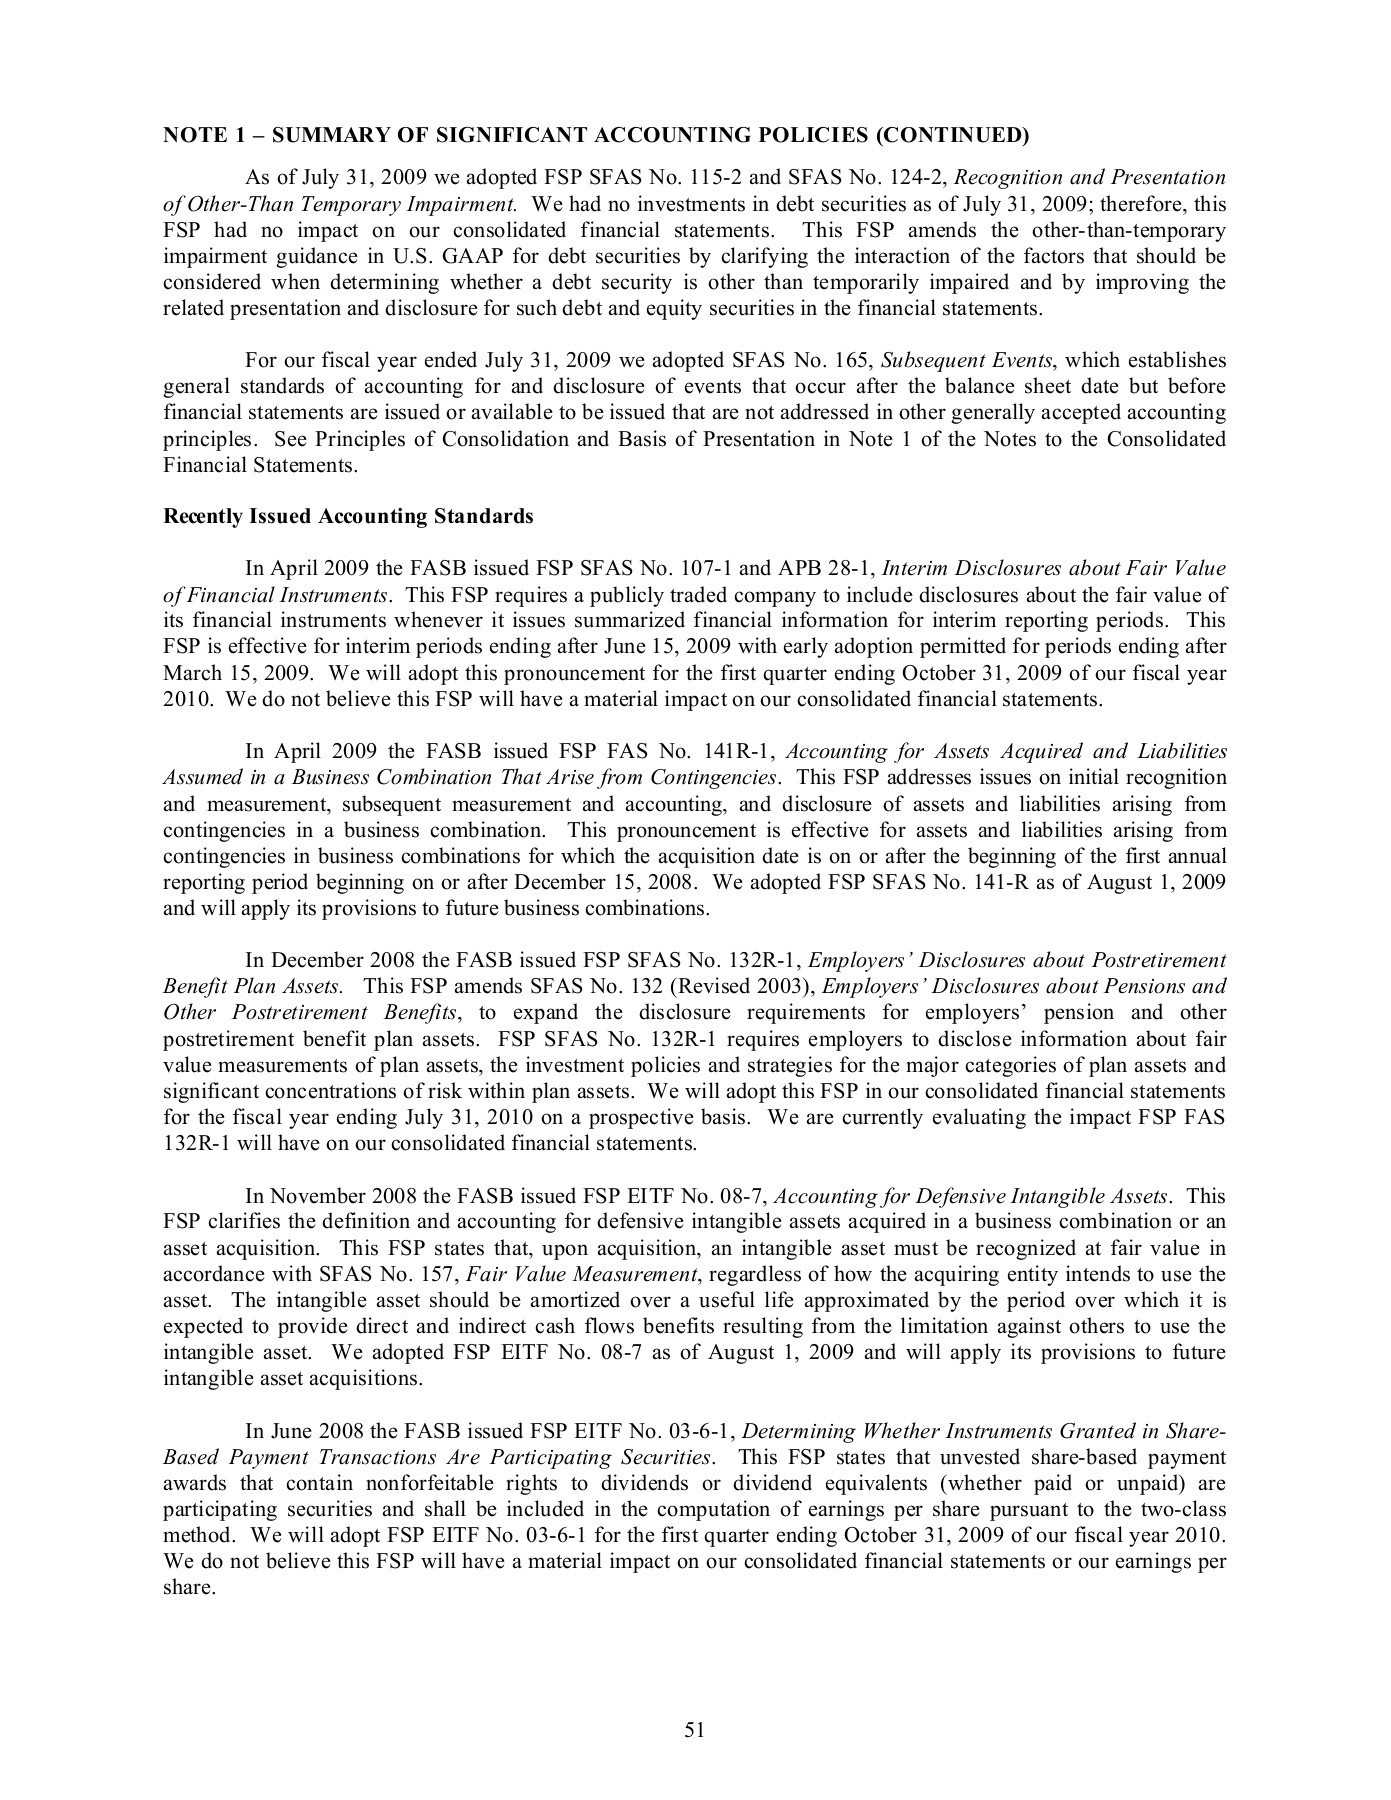 cover letter for summary annual report